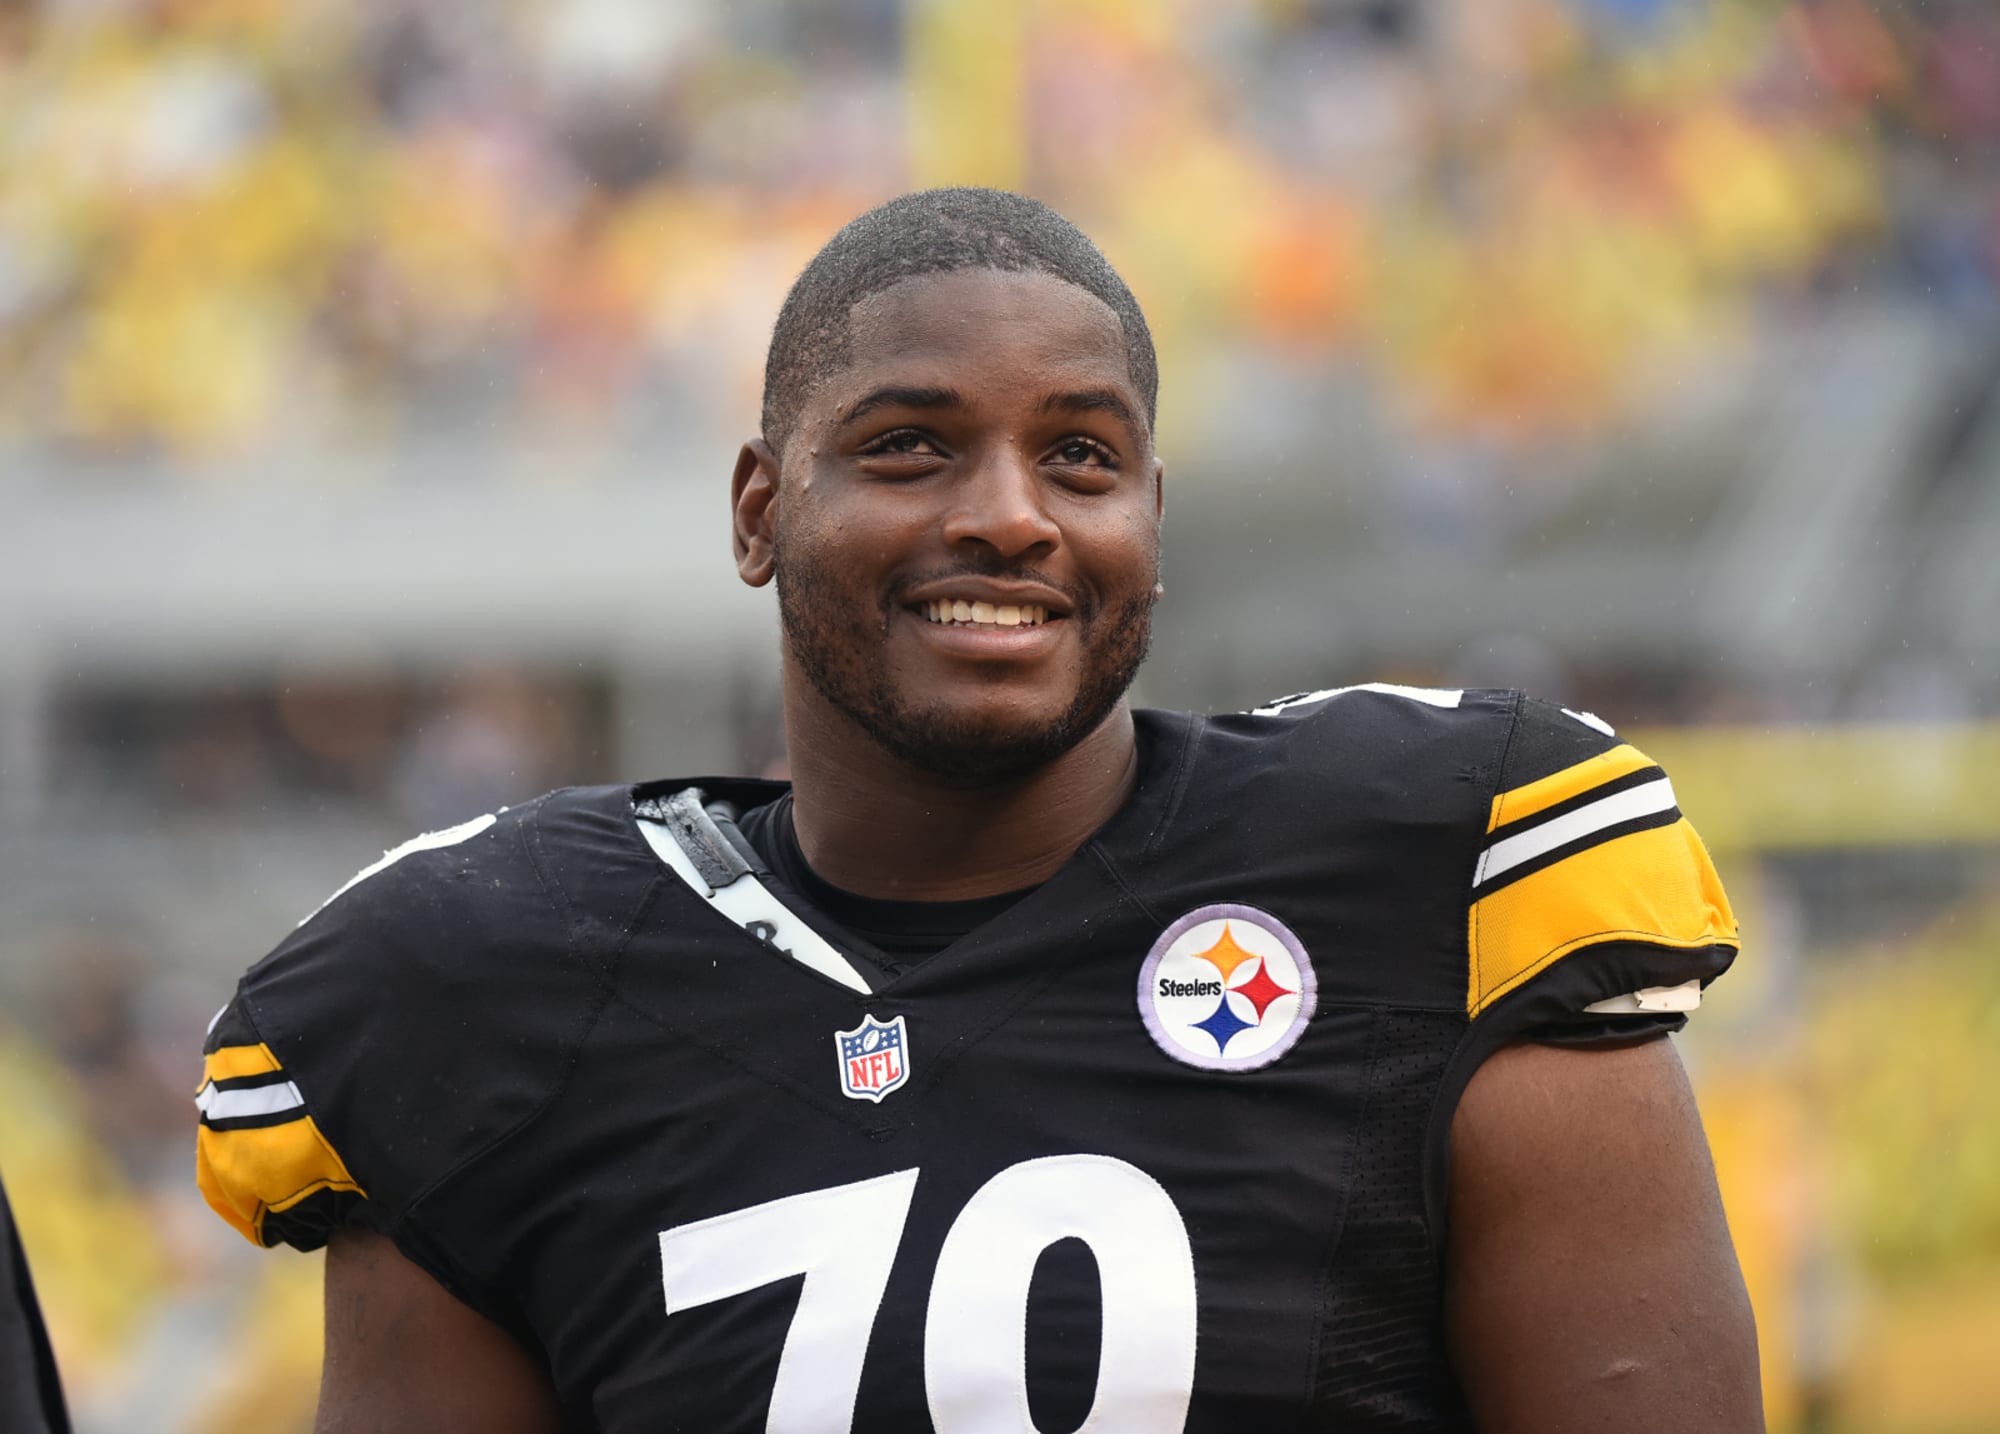 Is Steelers Javon Hargrave better than 